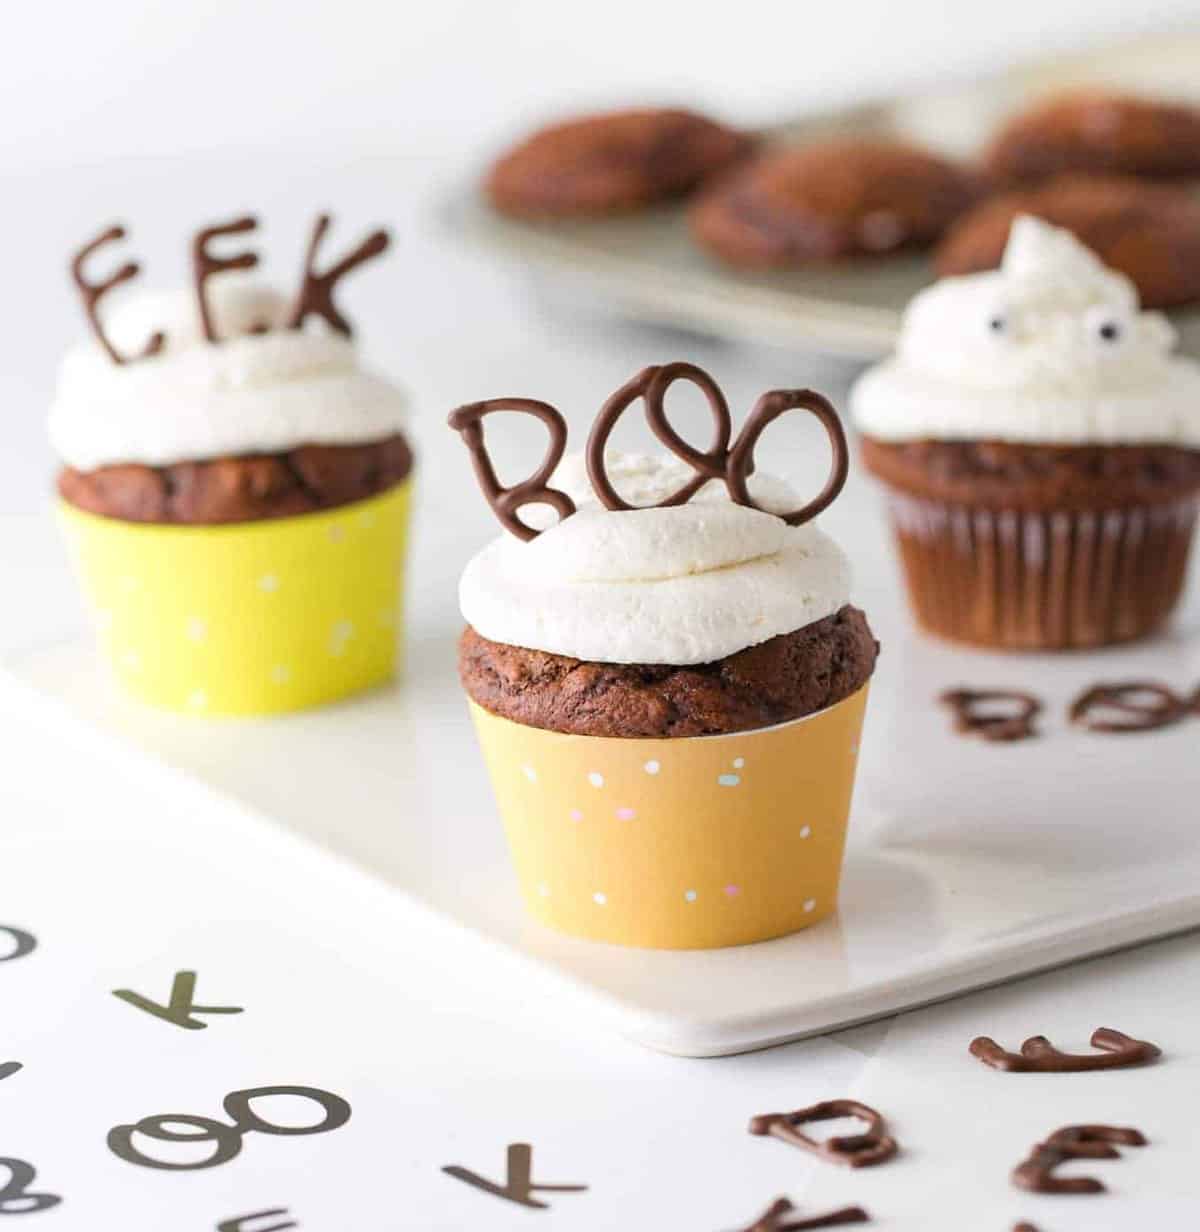 Chocolate cupcake with vanilla frosting in orange cupcake wrapper. With chocolate BOO word on top for edible Halloween cupcake topper.